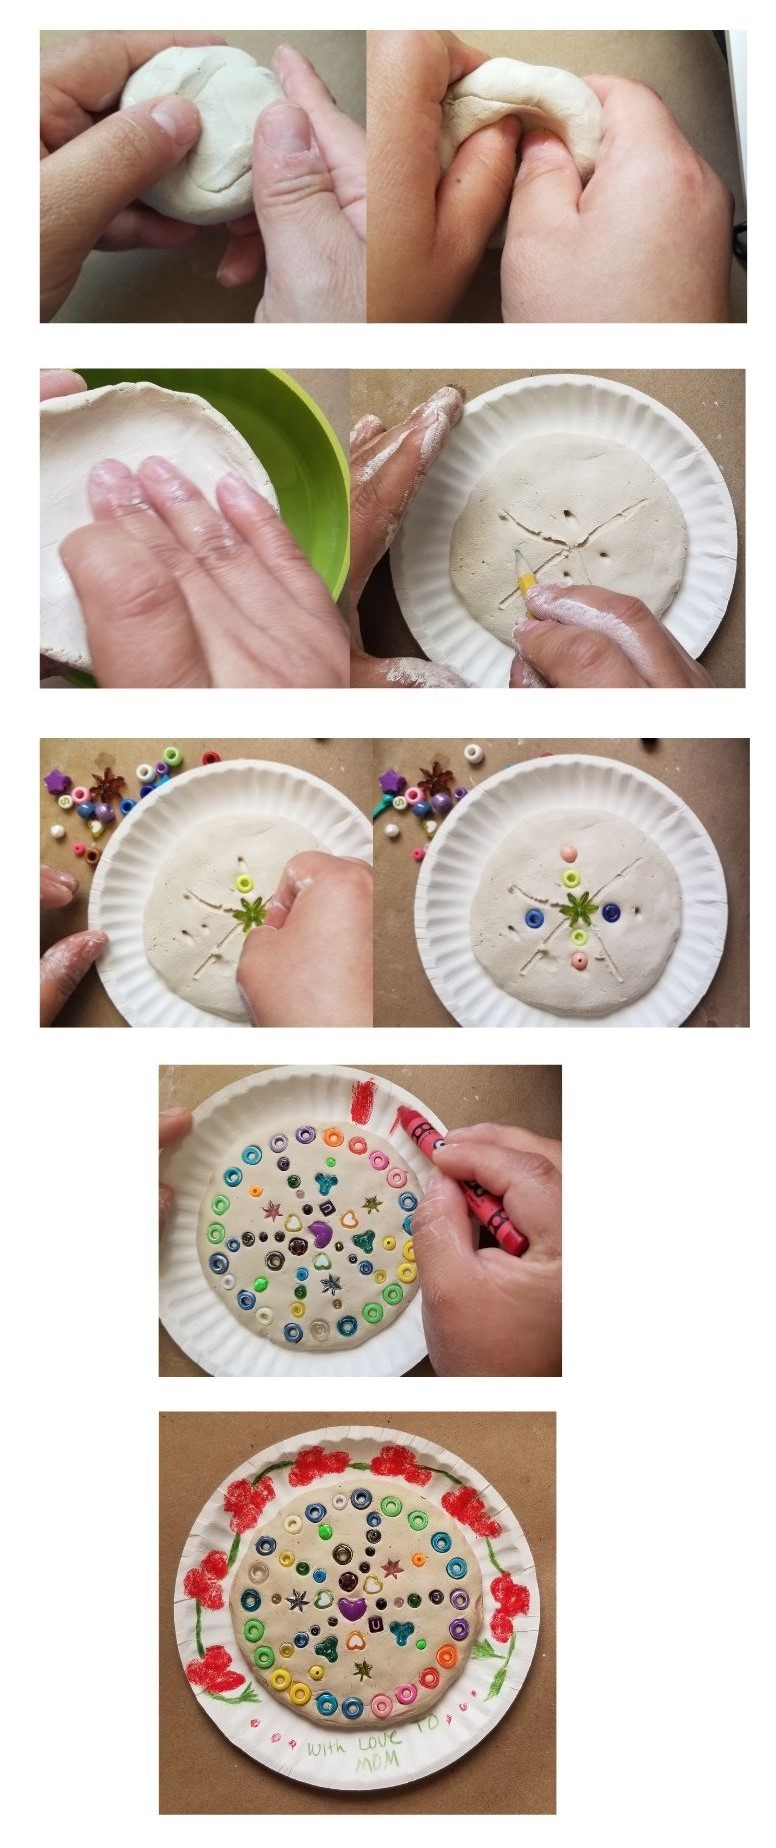 A grouping of images that showing the steps of how to make a Sailor’s Valentine using airdry clay, colorful plastic beads and small seashell.